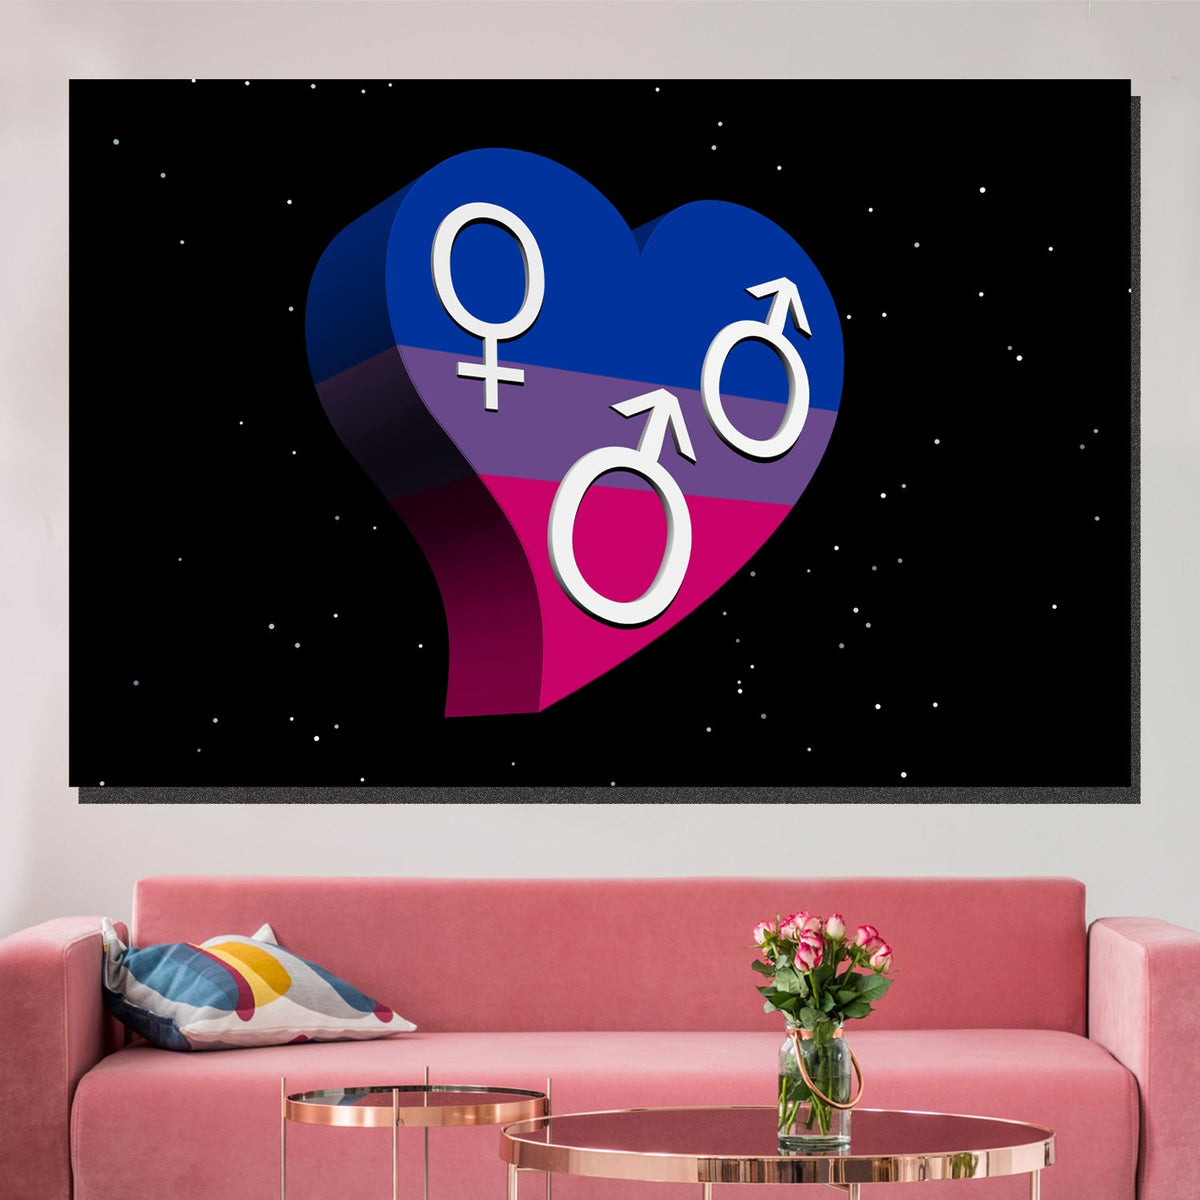 https://cdn.shopify.com/s/files/1/0387/9986/8044/products/BisexualManLoveCanvasArtprintStretched-4.jpg